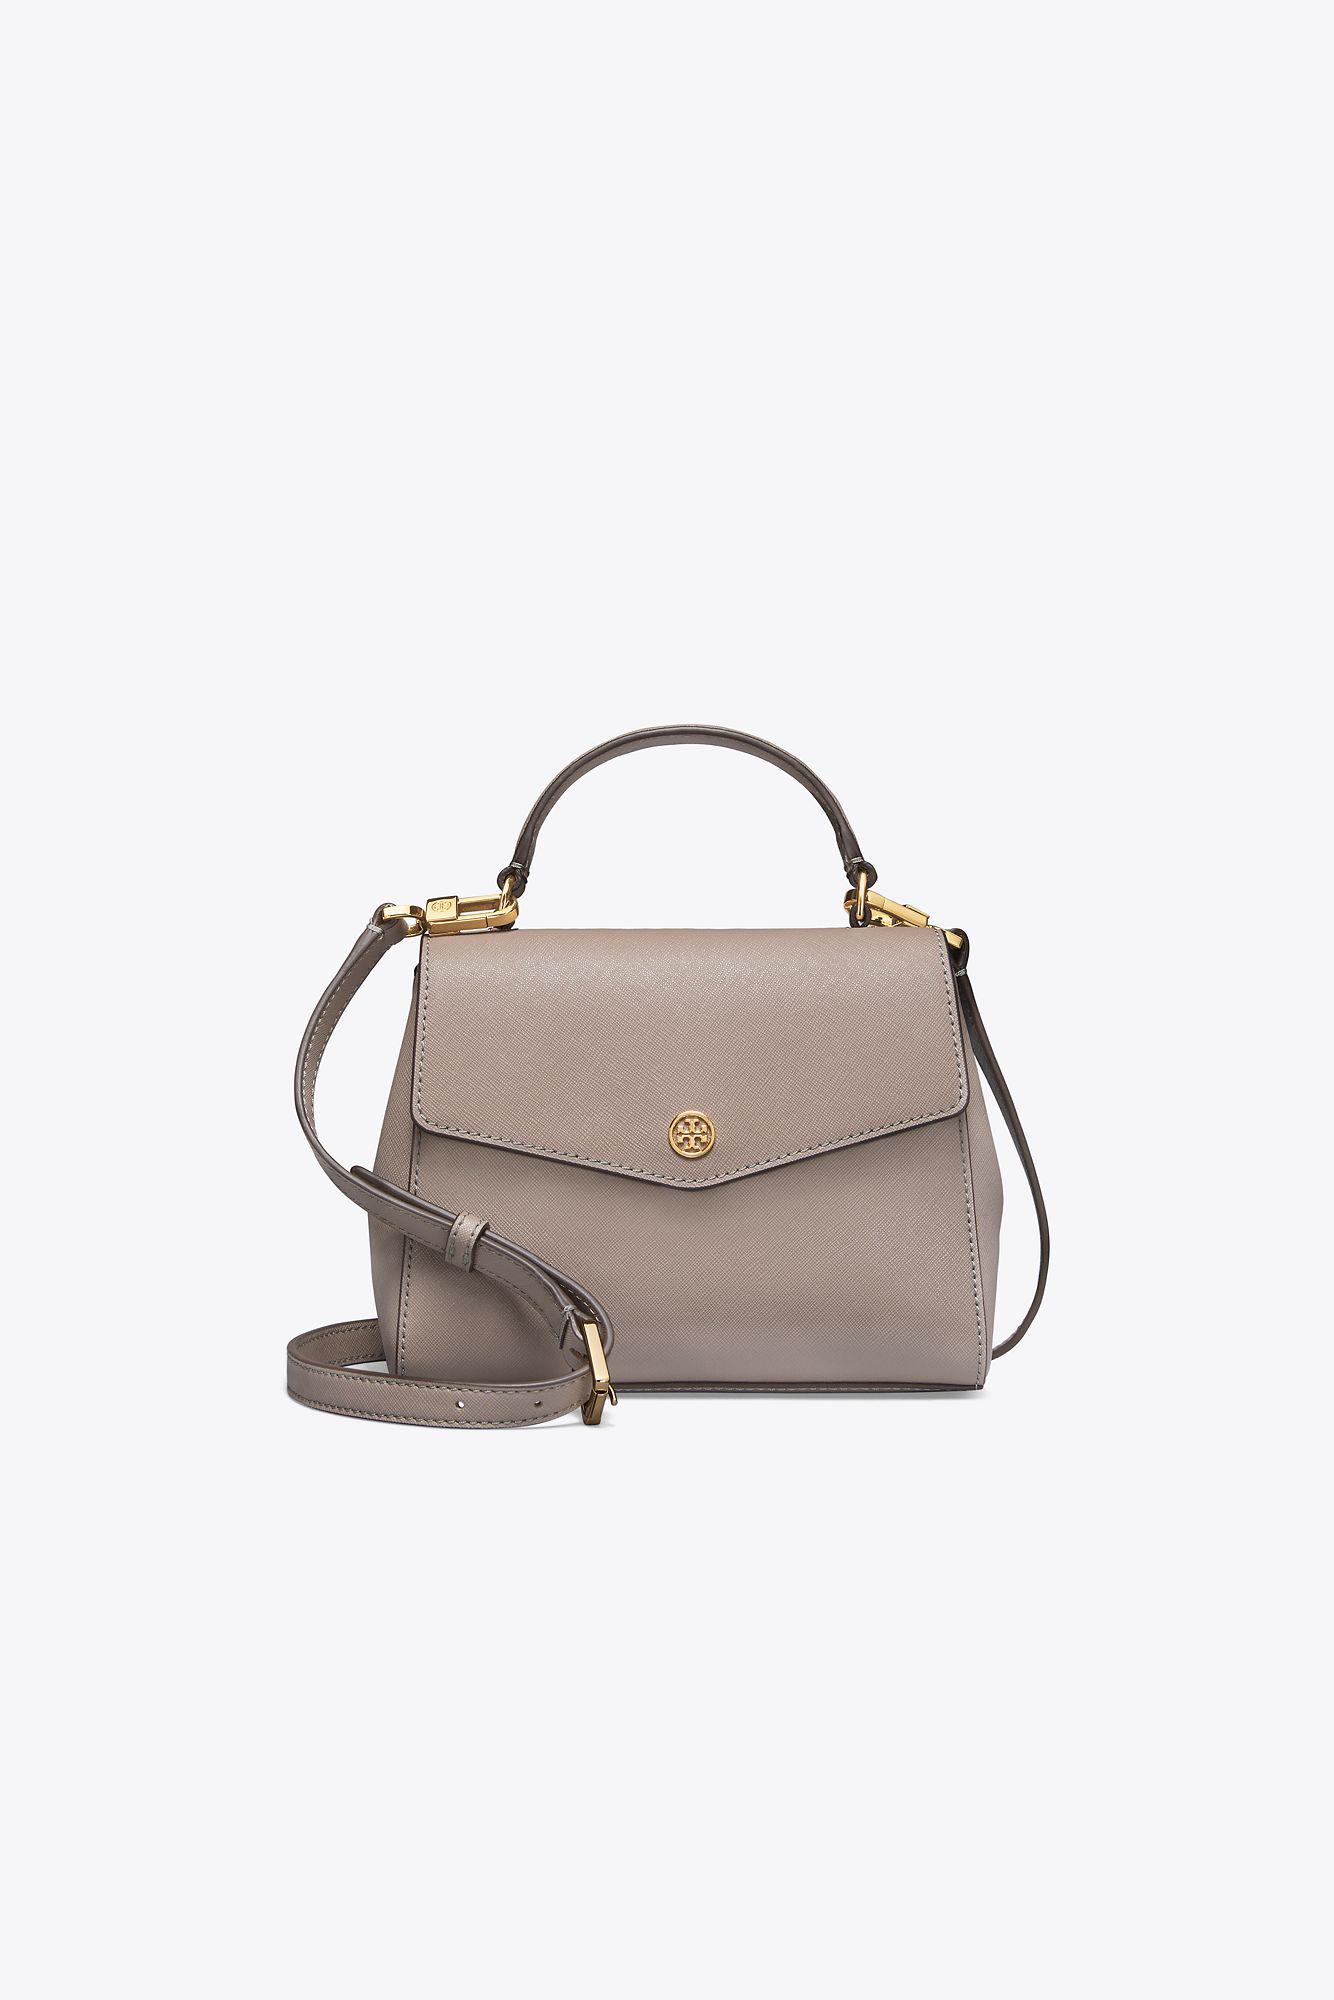 Tory Burch Robinson Small Top-handle Satchel in Gray | Lyst